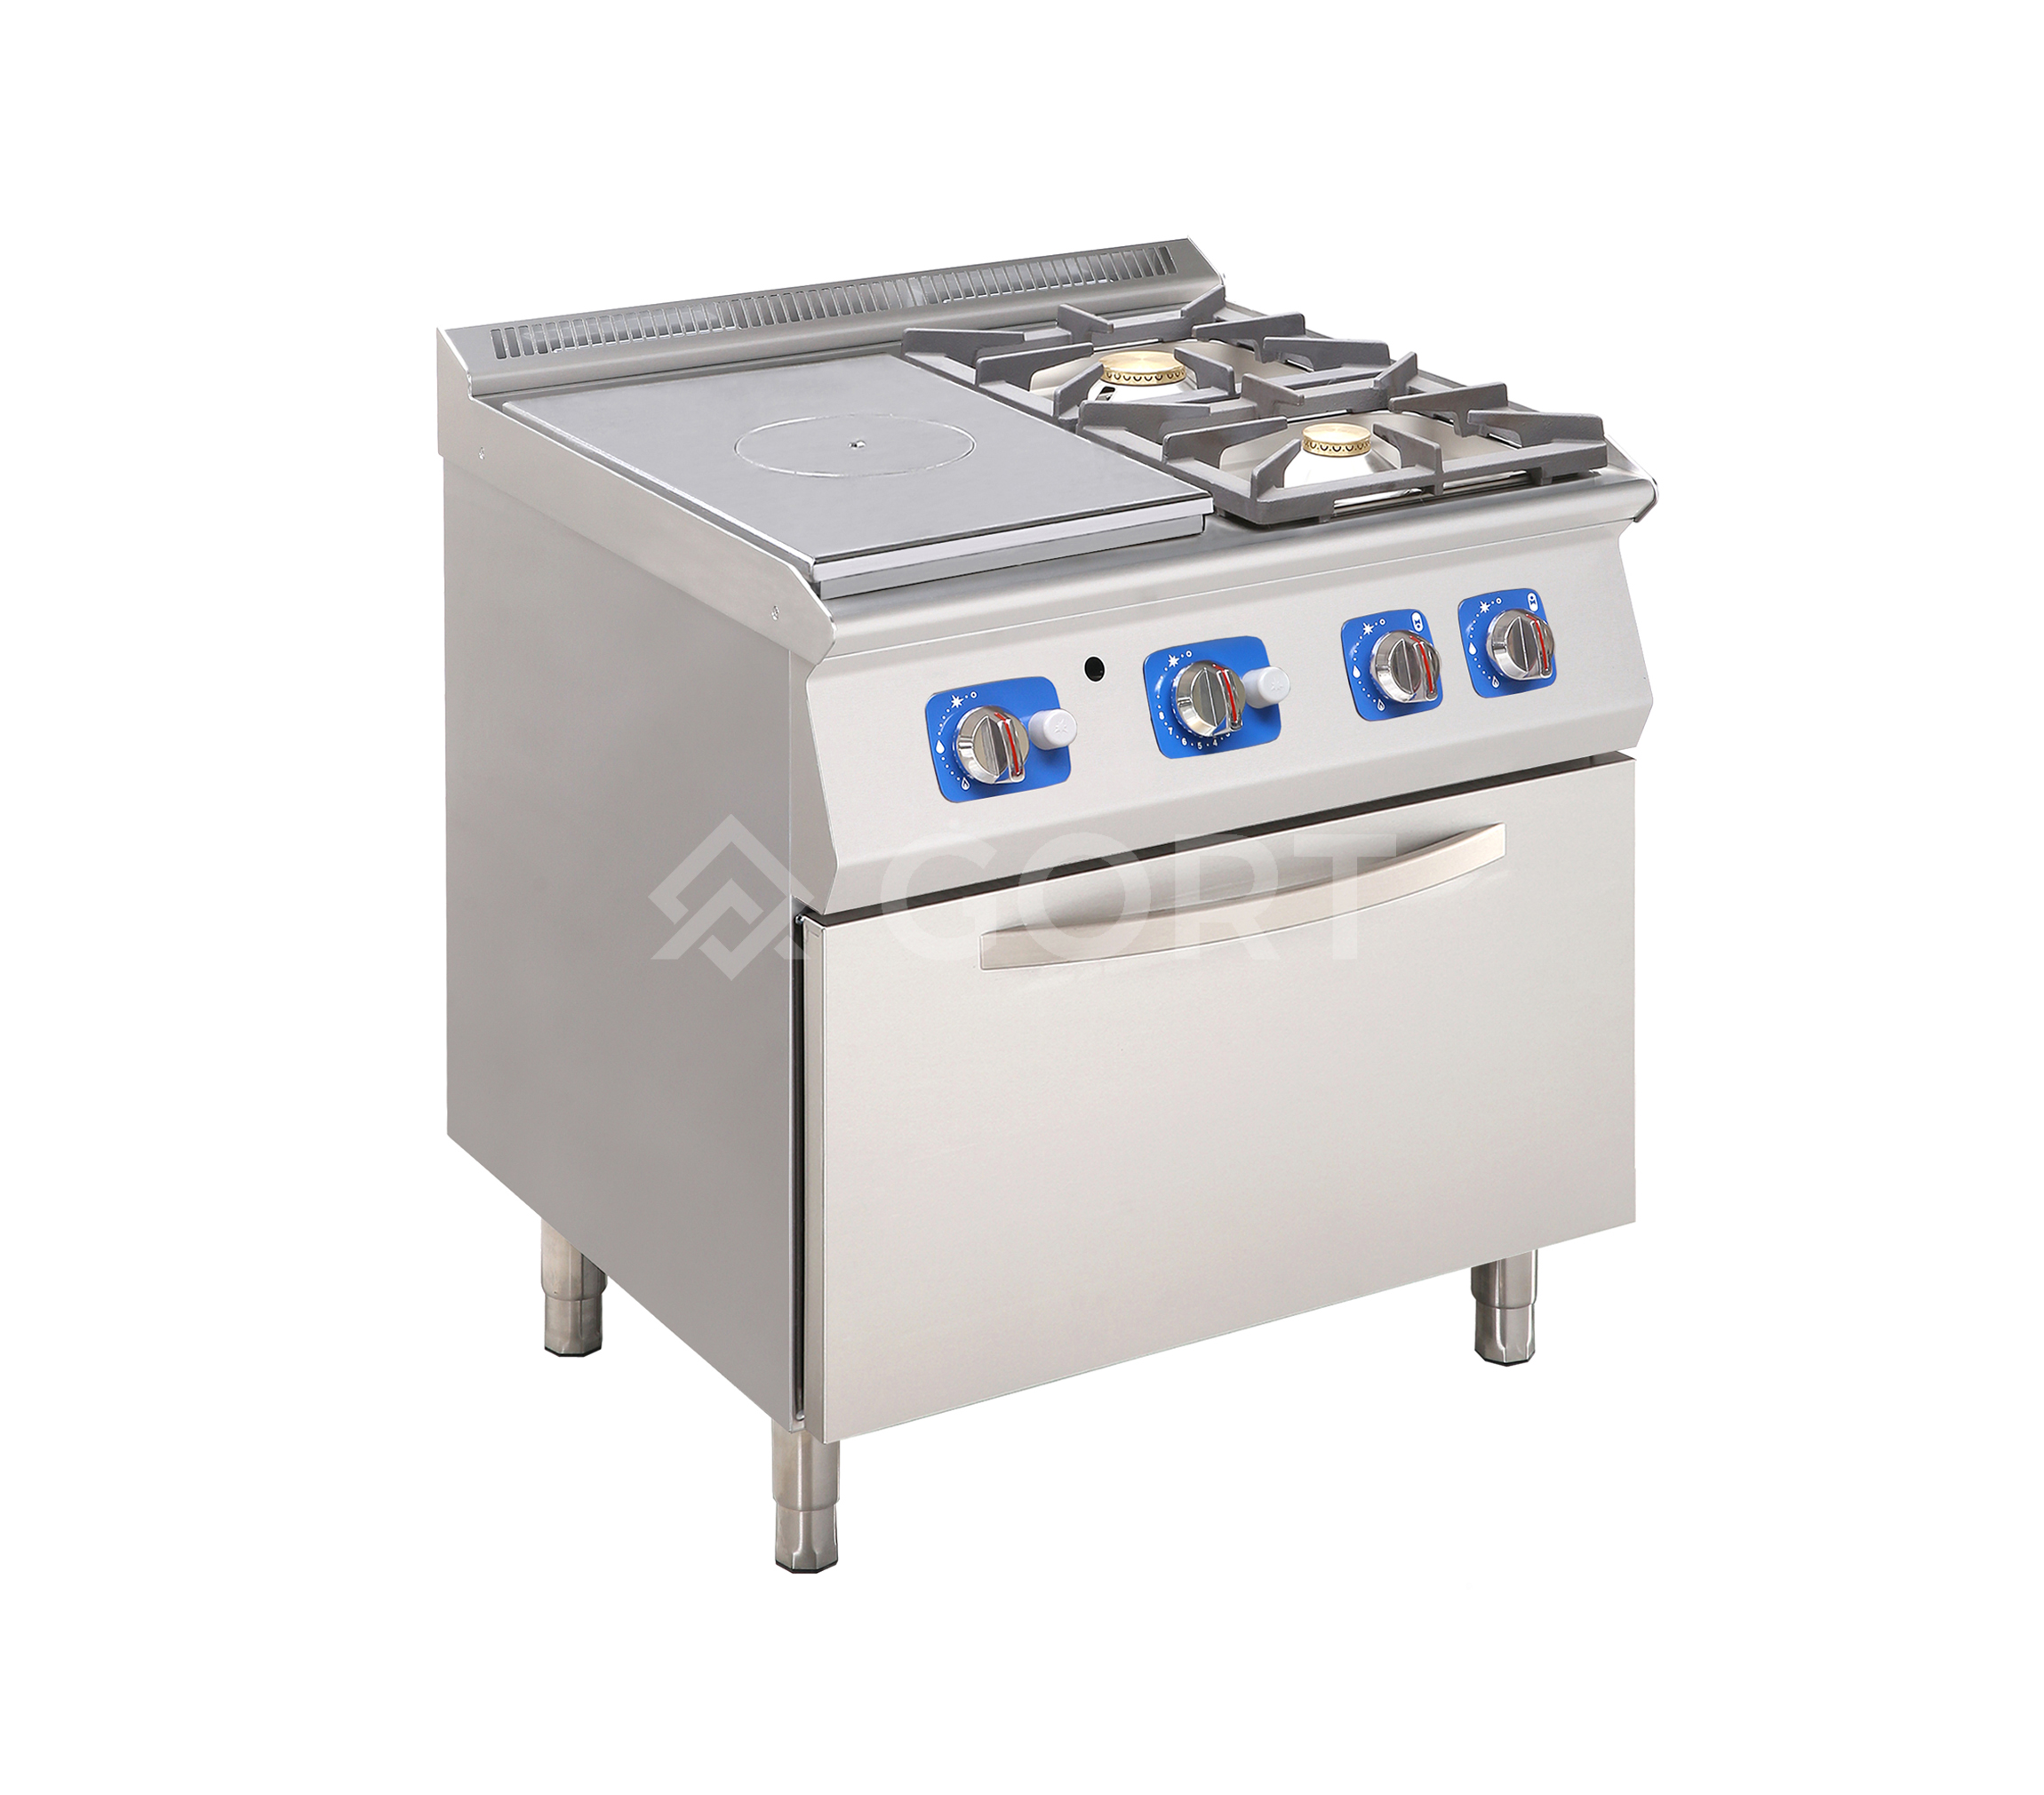 Gas solid top with 2 burner gas cooking range on gas oven